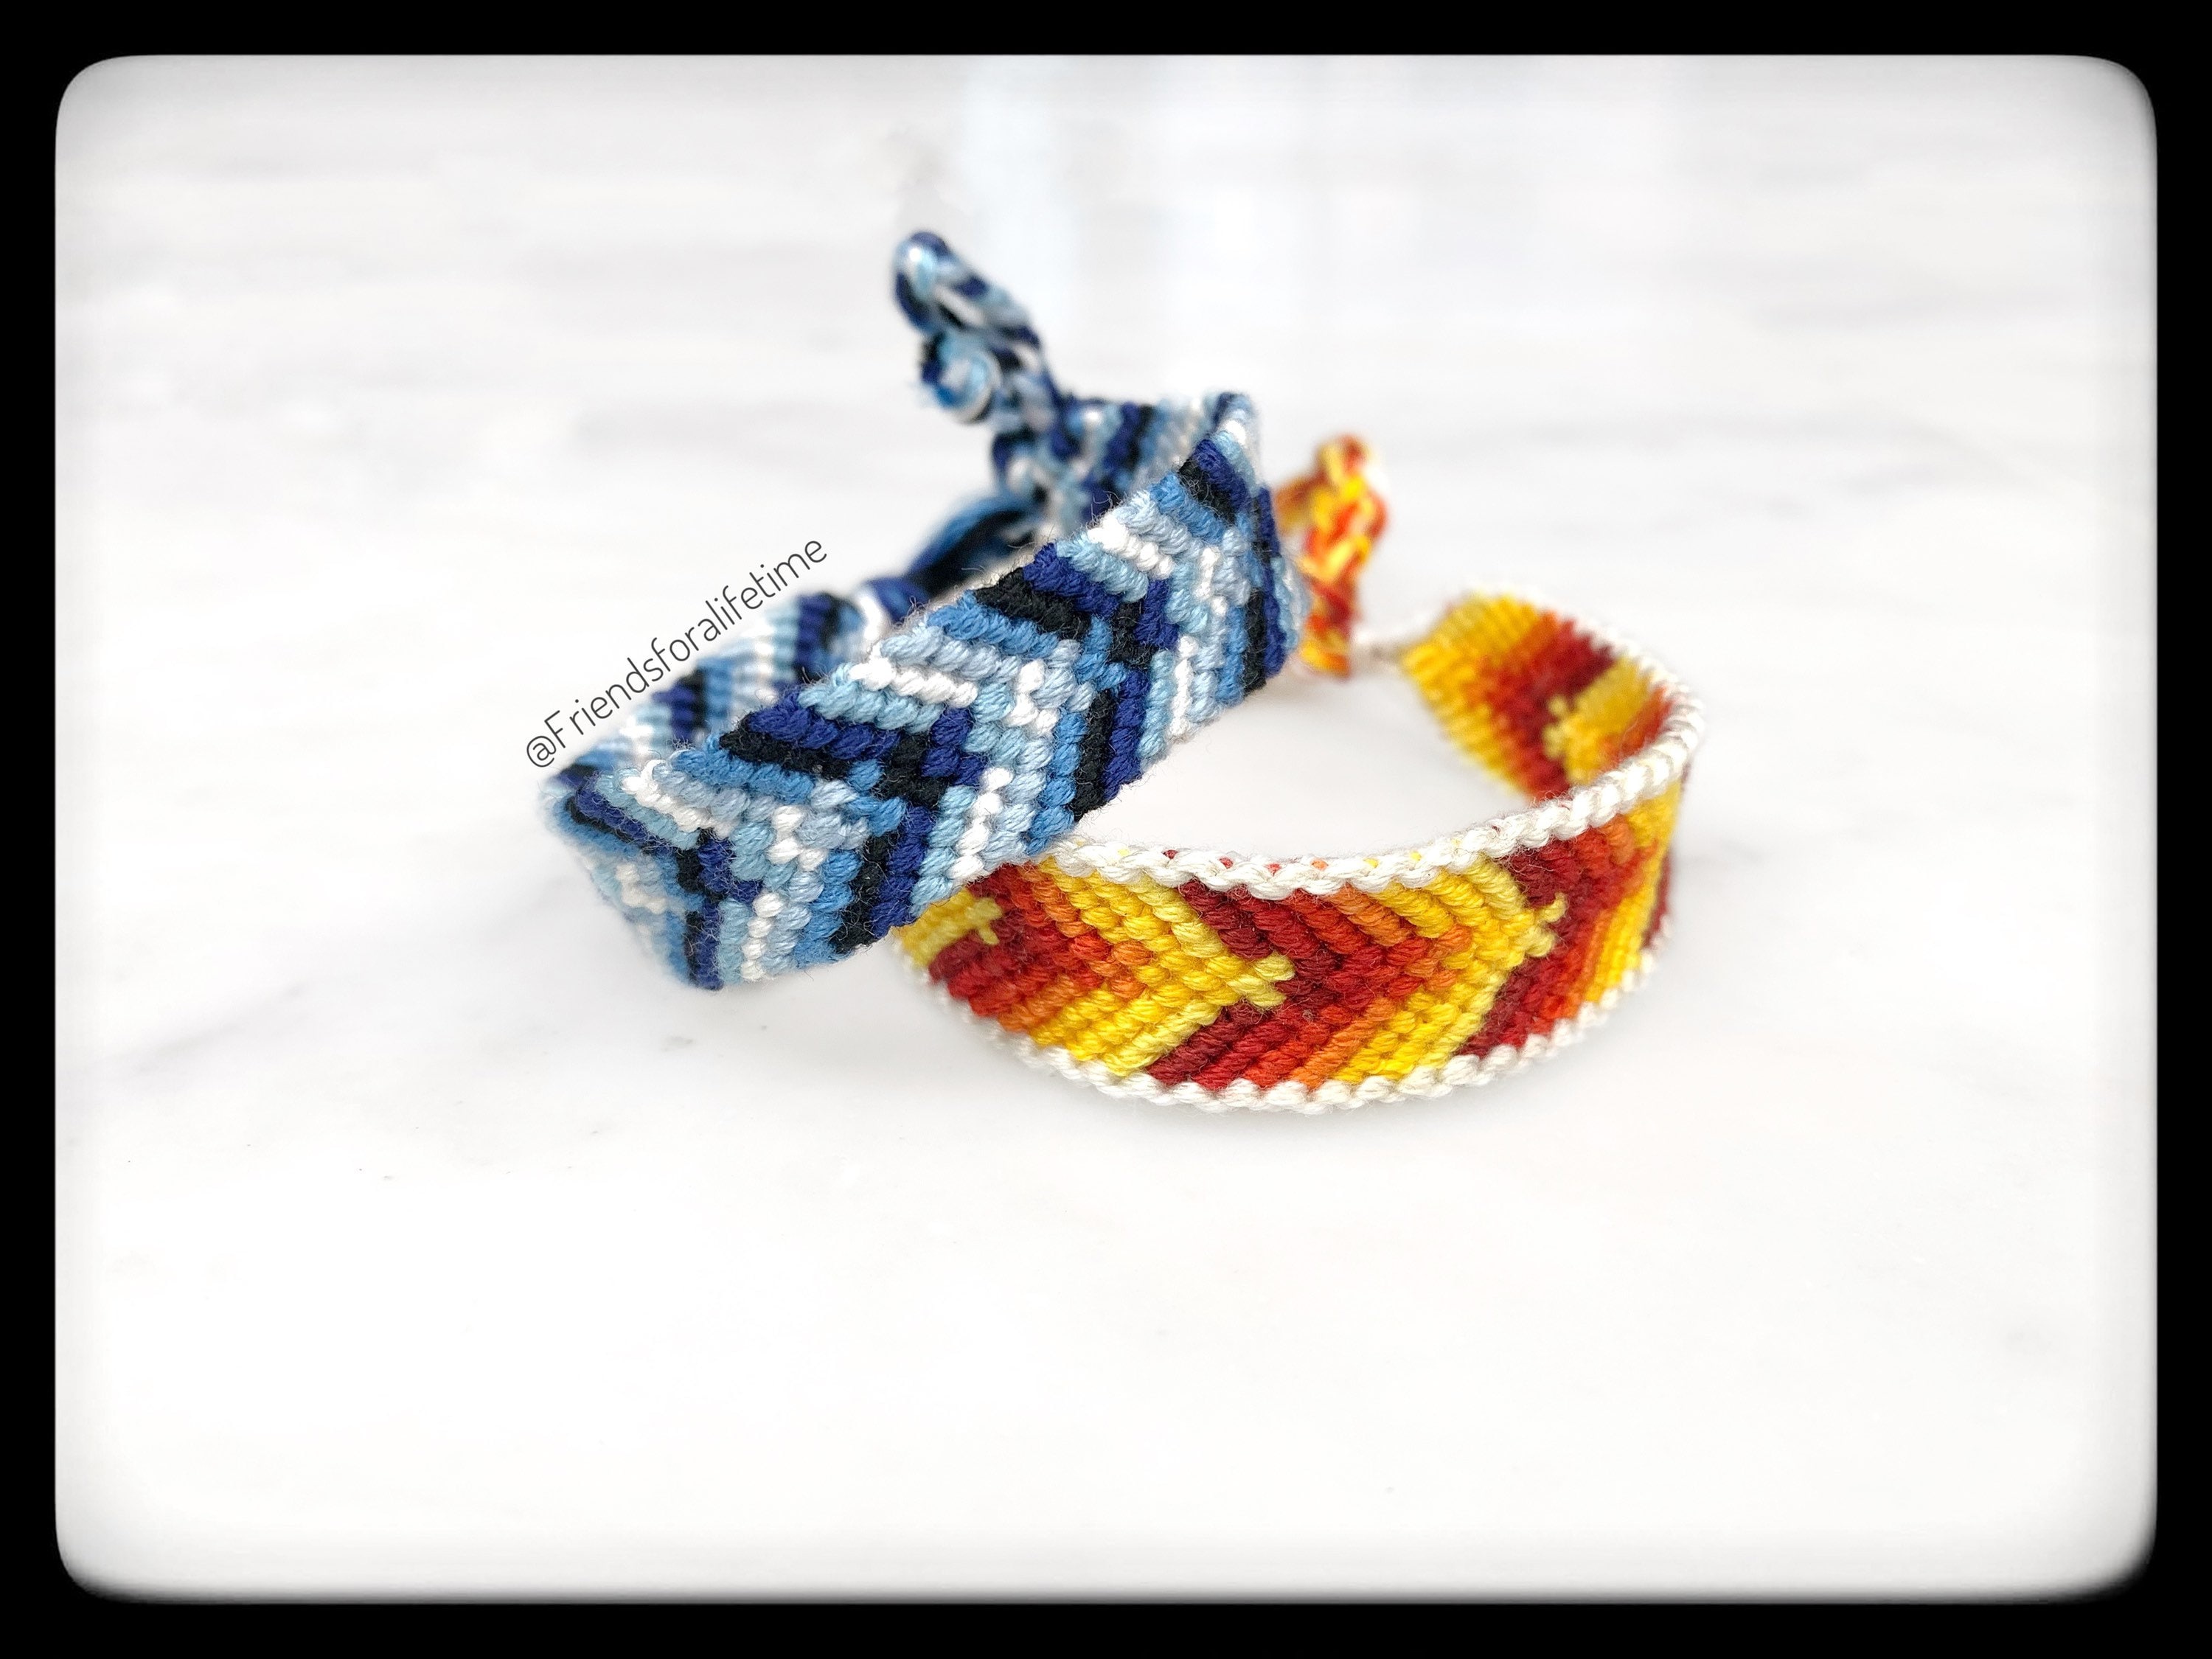 Group Of Colorful Handmade Homemade Natural Woven Bracelets Of Friendship  On Old Wood Background Checkered Patterns Stock Photo - Download Image Now  - iStock